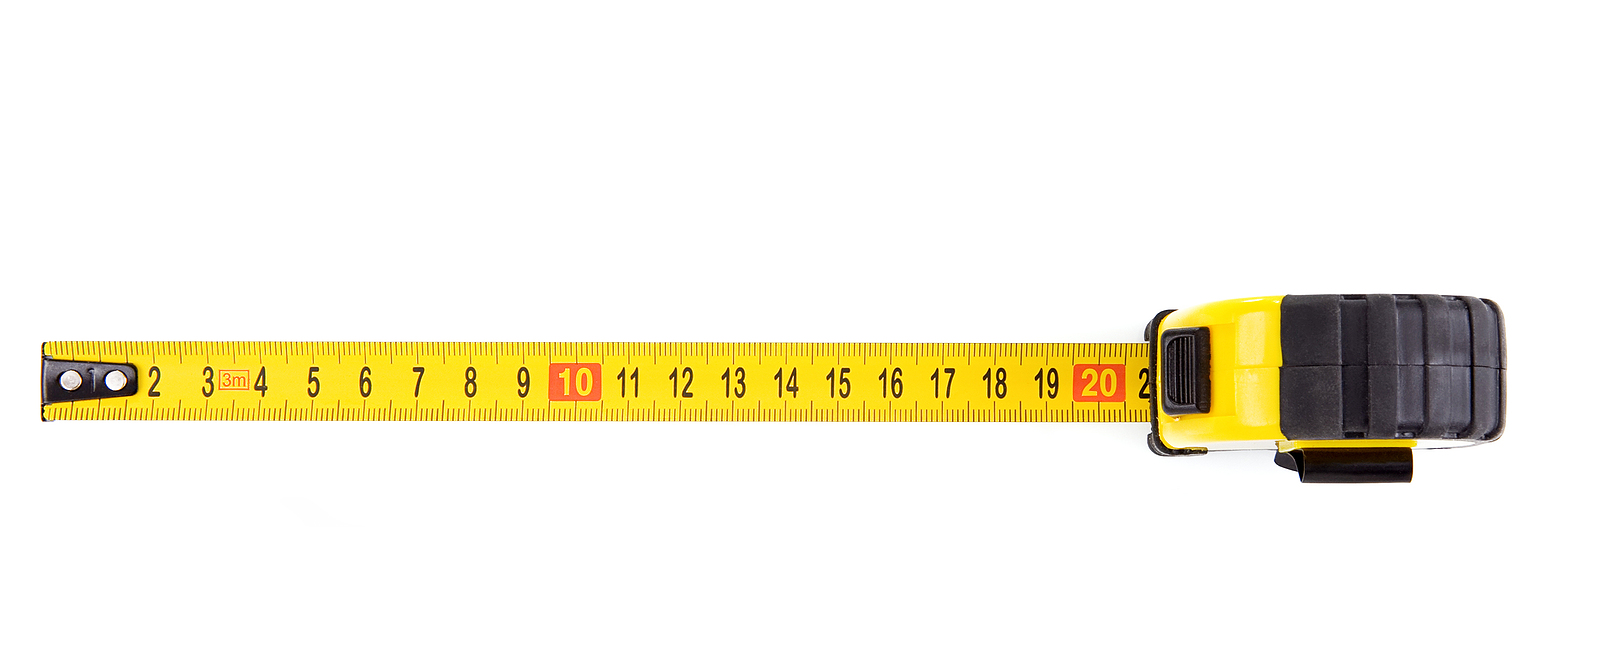 National Tape Measure Day - July 14, 2024